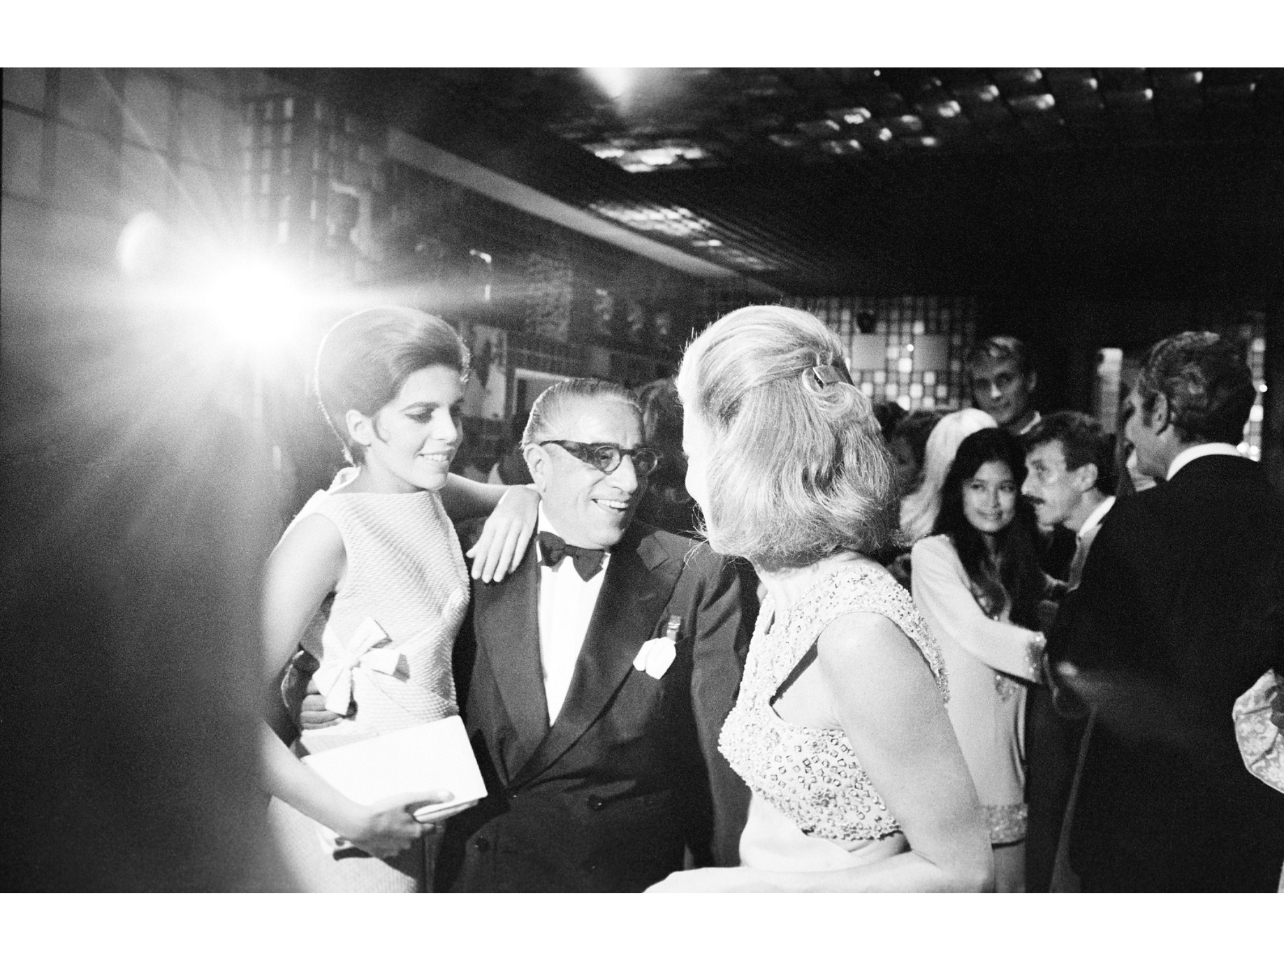 Black and white portrait of Aristotle Onassis with daughter Cristina at Marina Cicogna’s party, Venice 1967